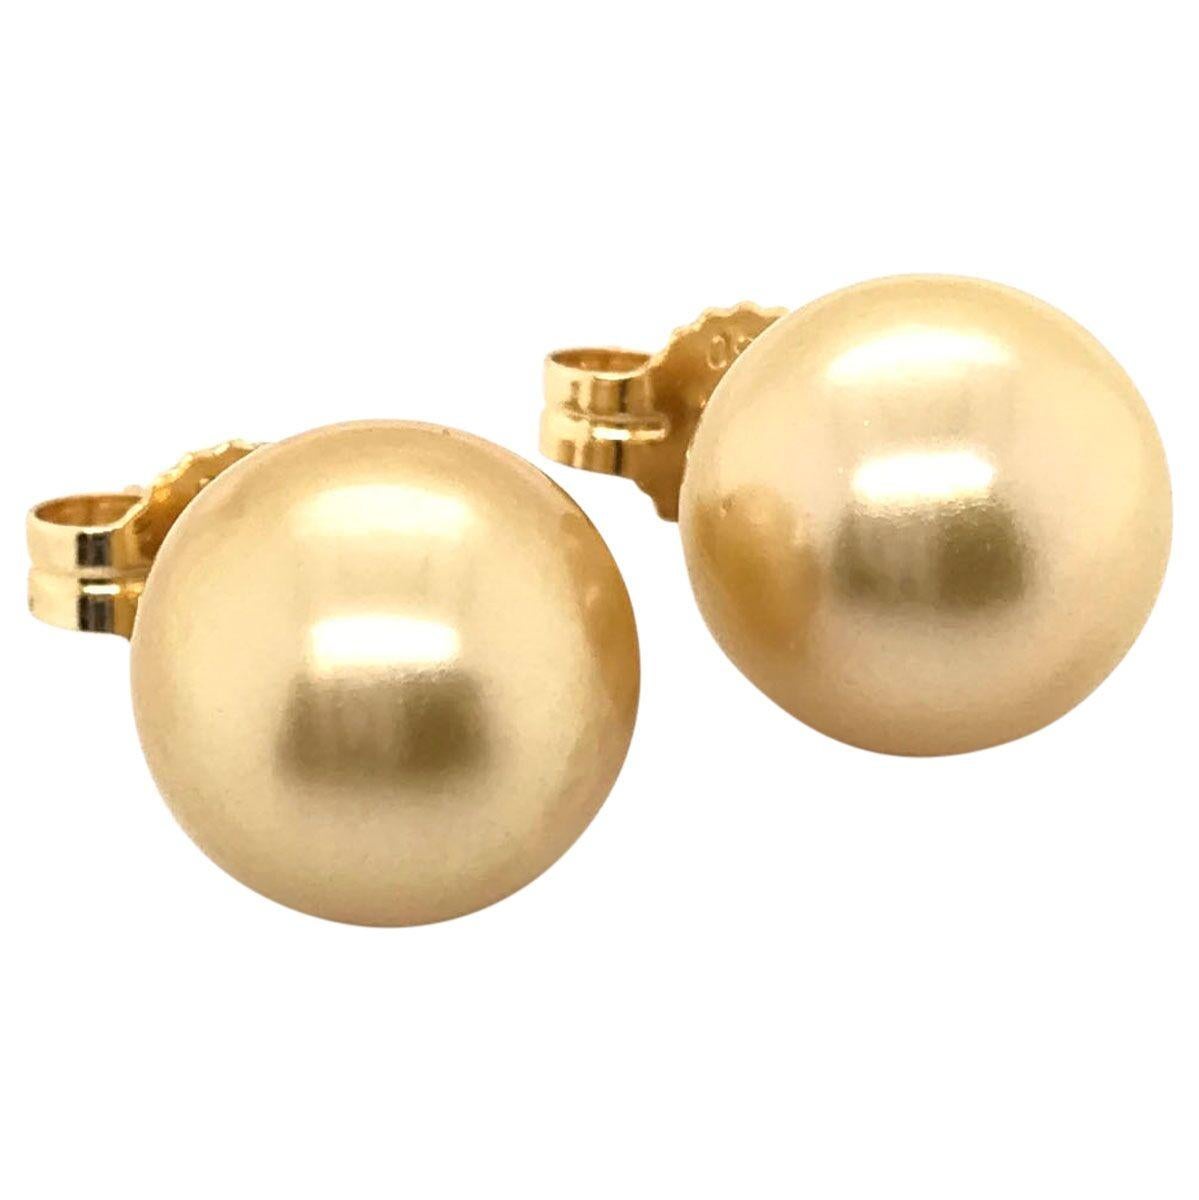 The allure of gold, well now you can have it in South Sea cultured pearls. These beautiful studs are a must for all jewellery wardrobes, for the times when you want to wear something luxurious but not look overdone. These gorgeous stud earrings are